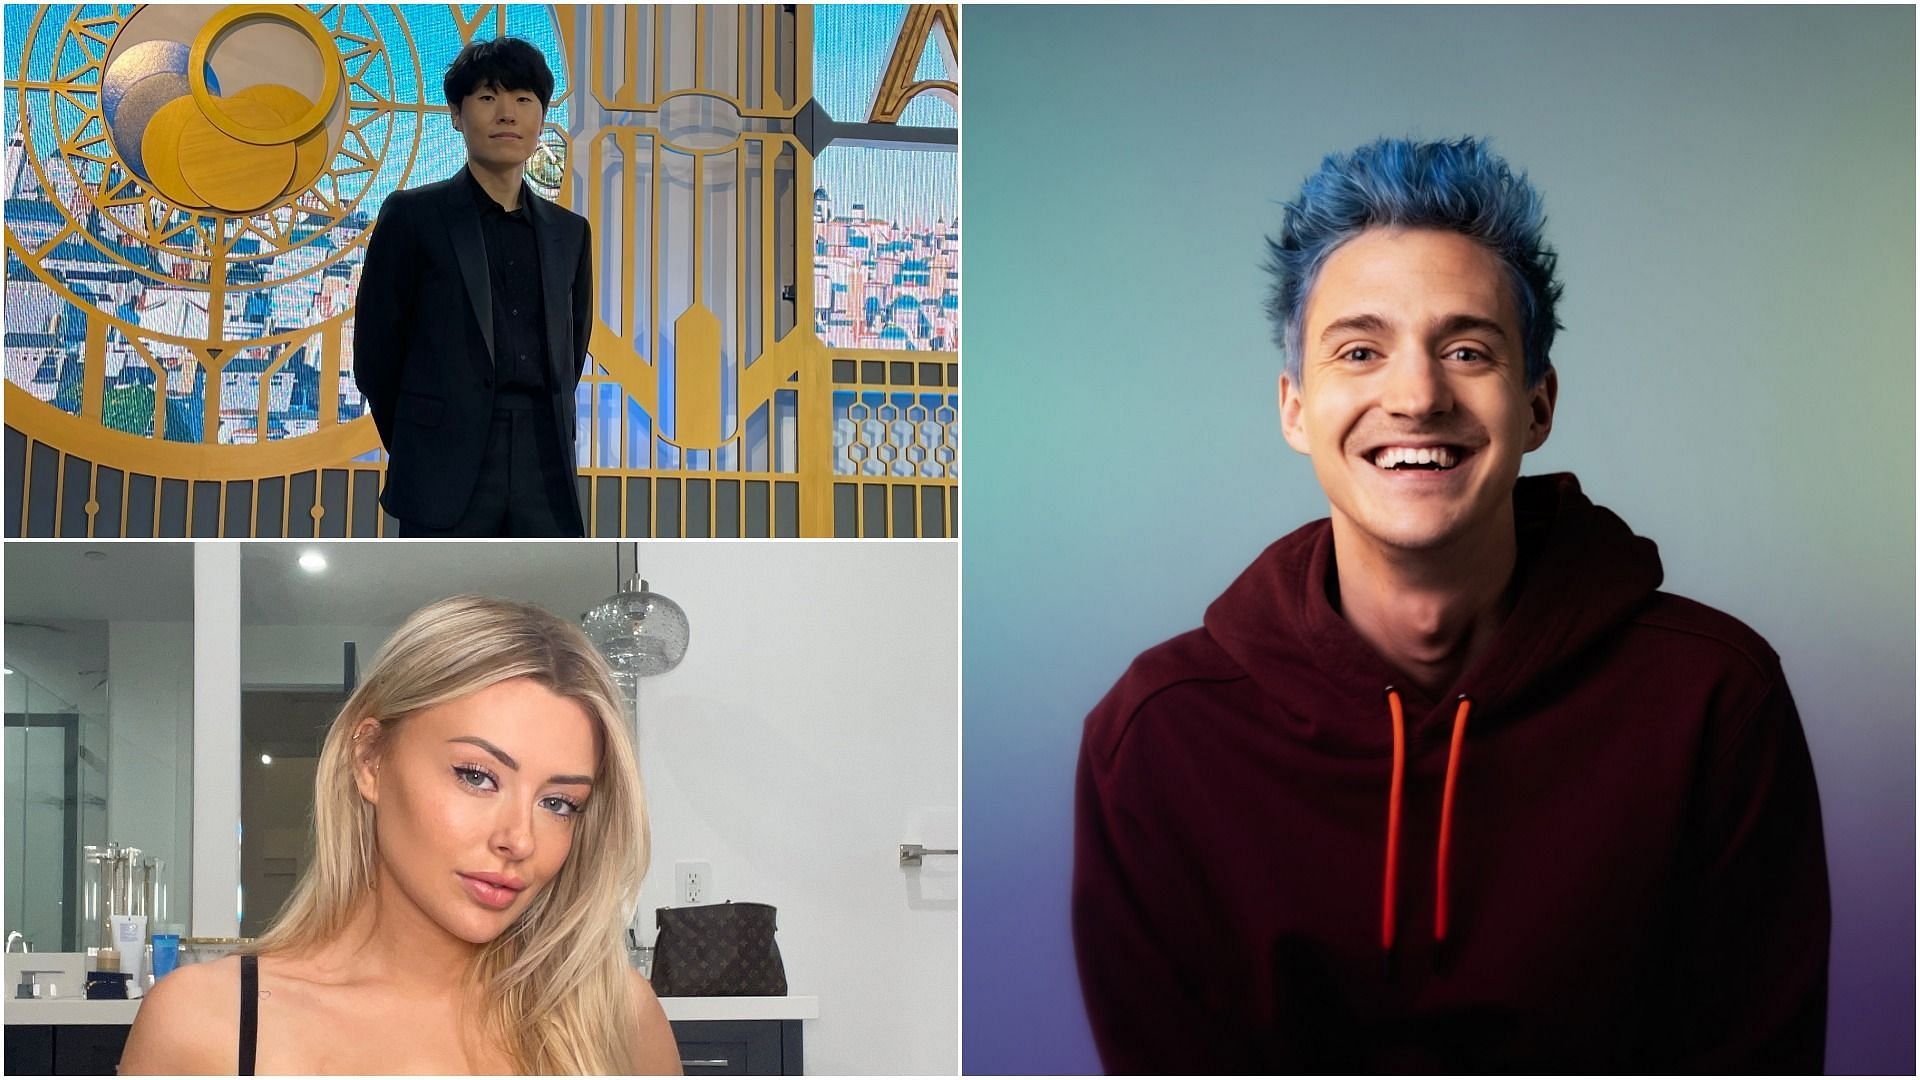 Many popular streamers have left Twitch to sign big exclusivity deals before returning (Images via Corinna Kopf, Disguised Toast, Ninja/Twitter)